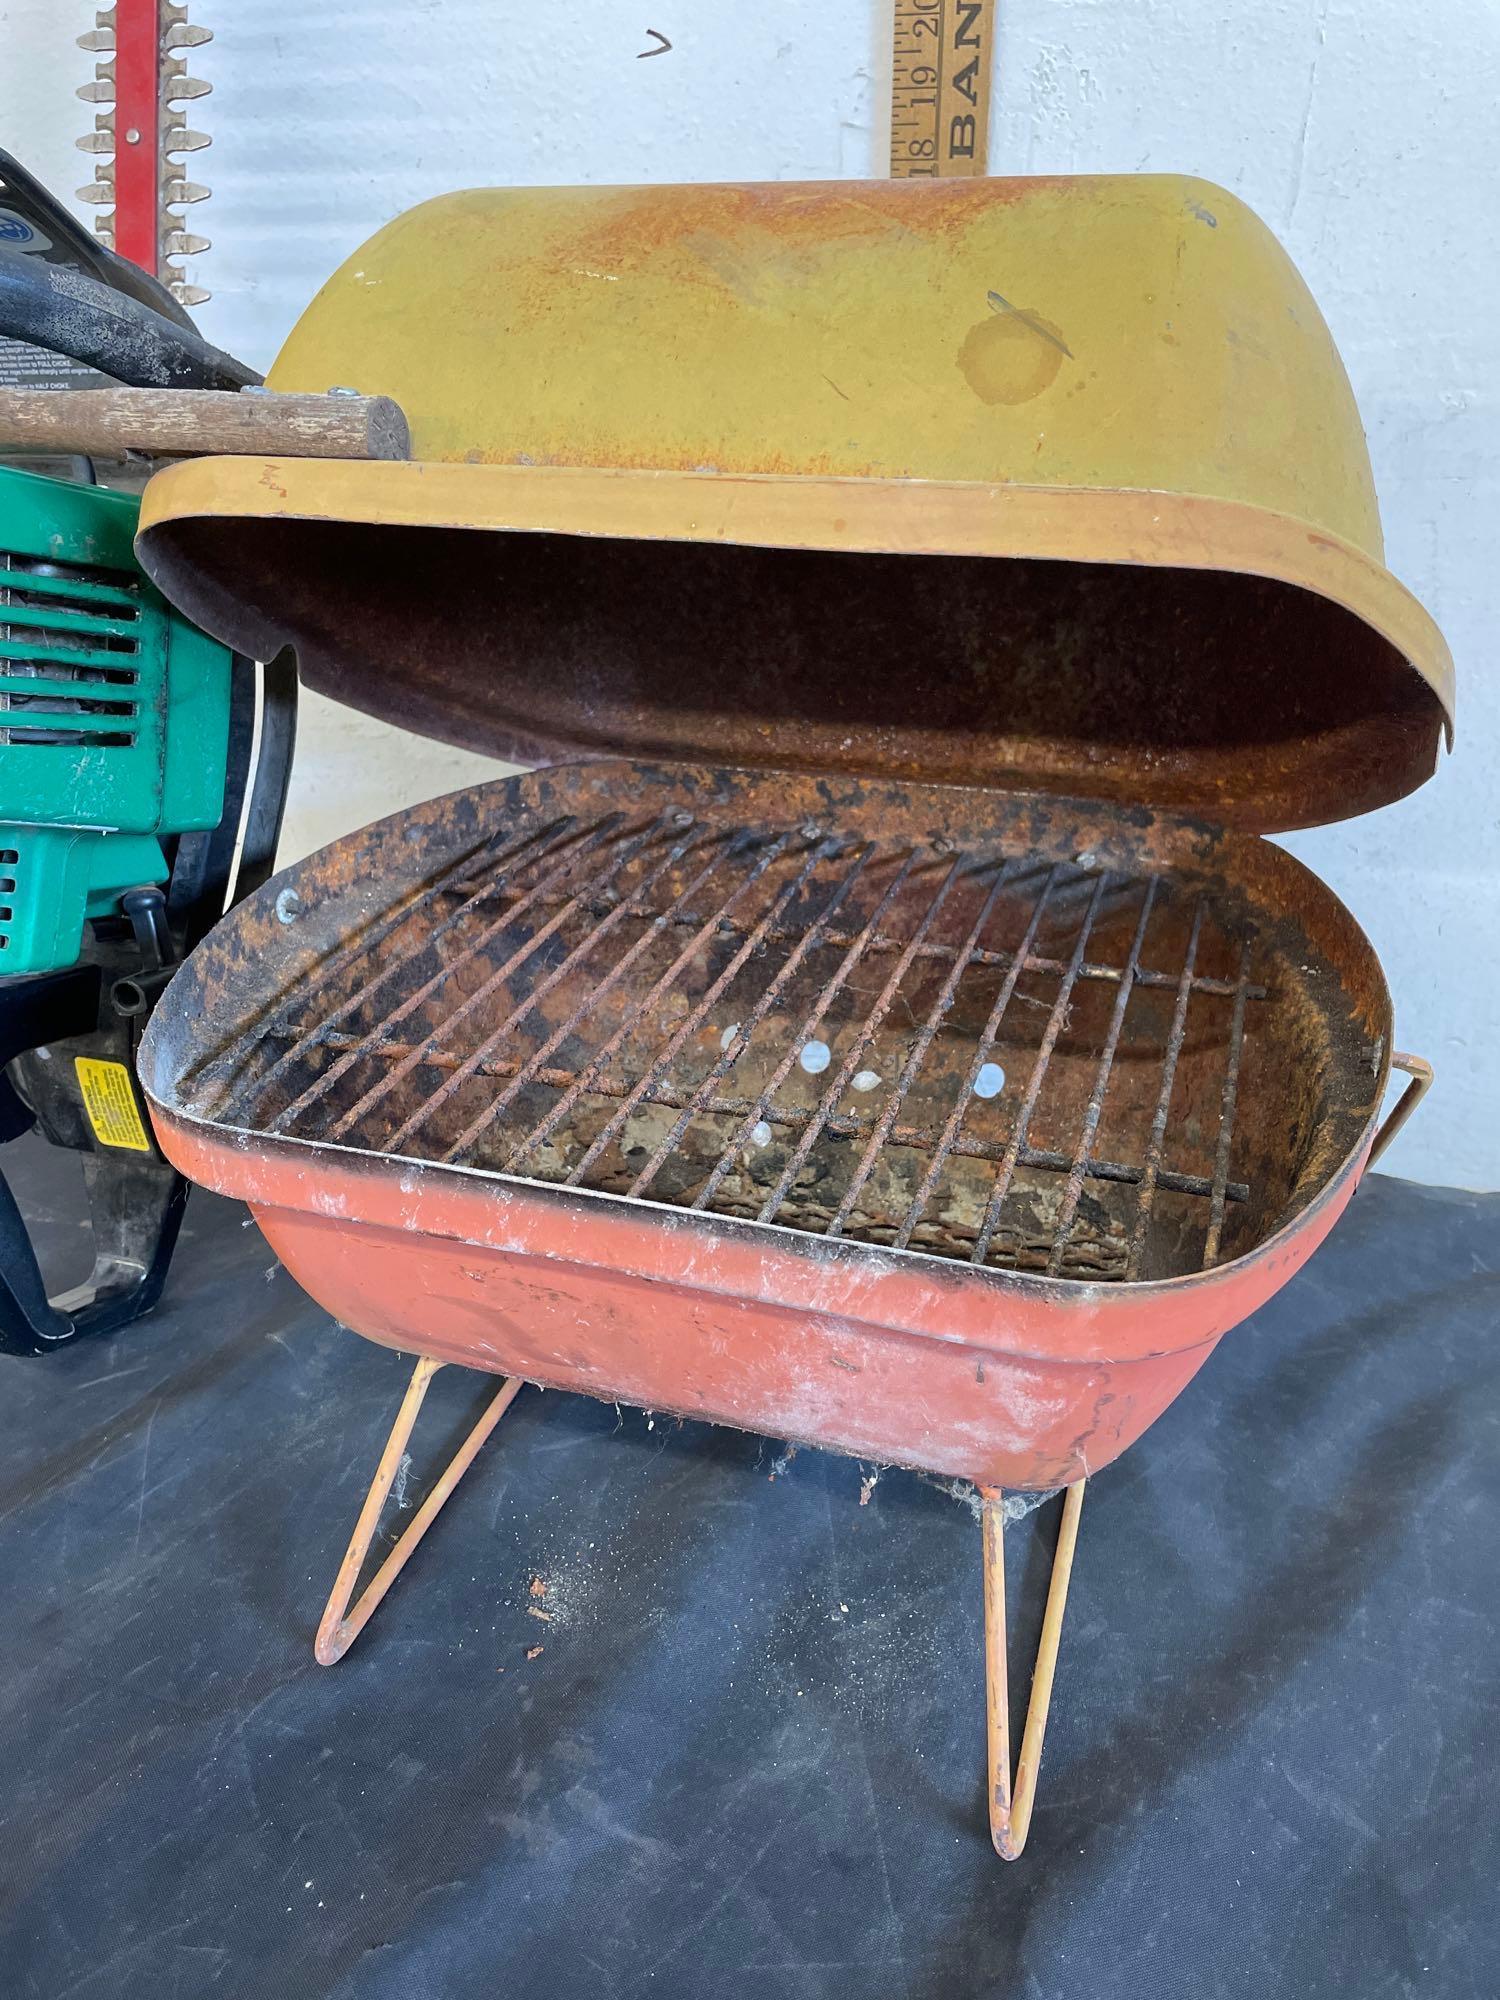 Excalibur Weed Eater 22? and Portable Grill